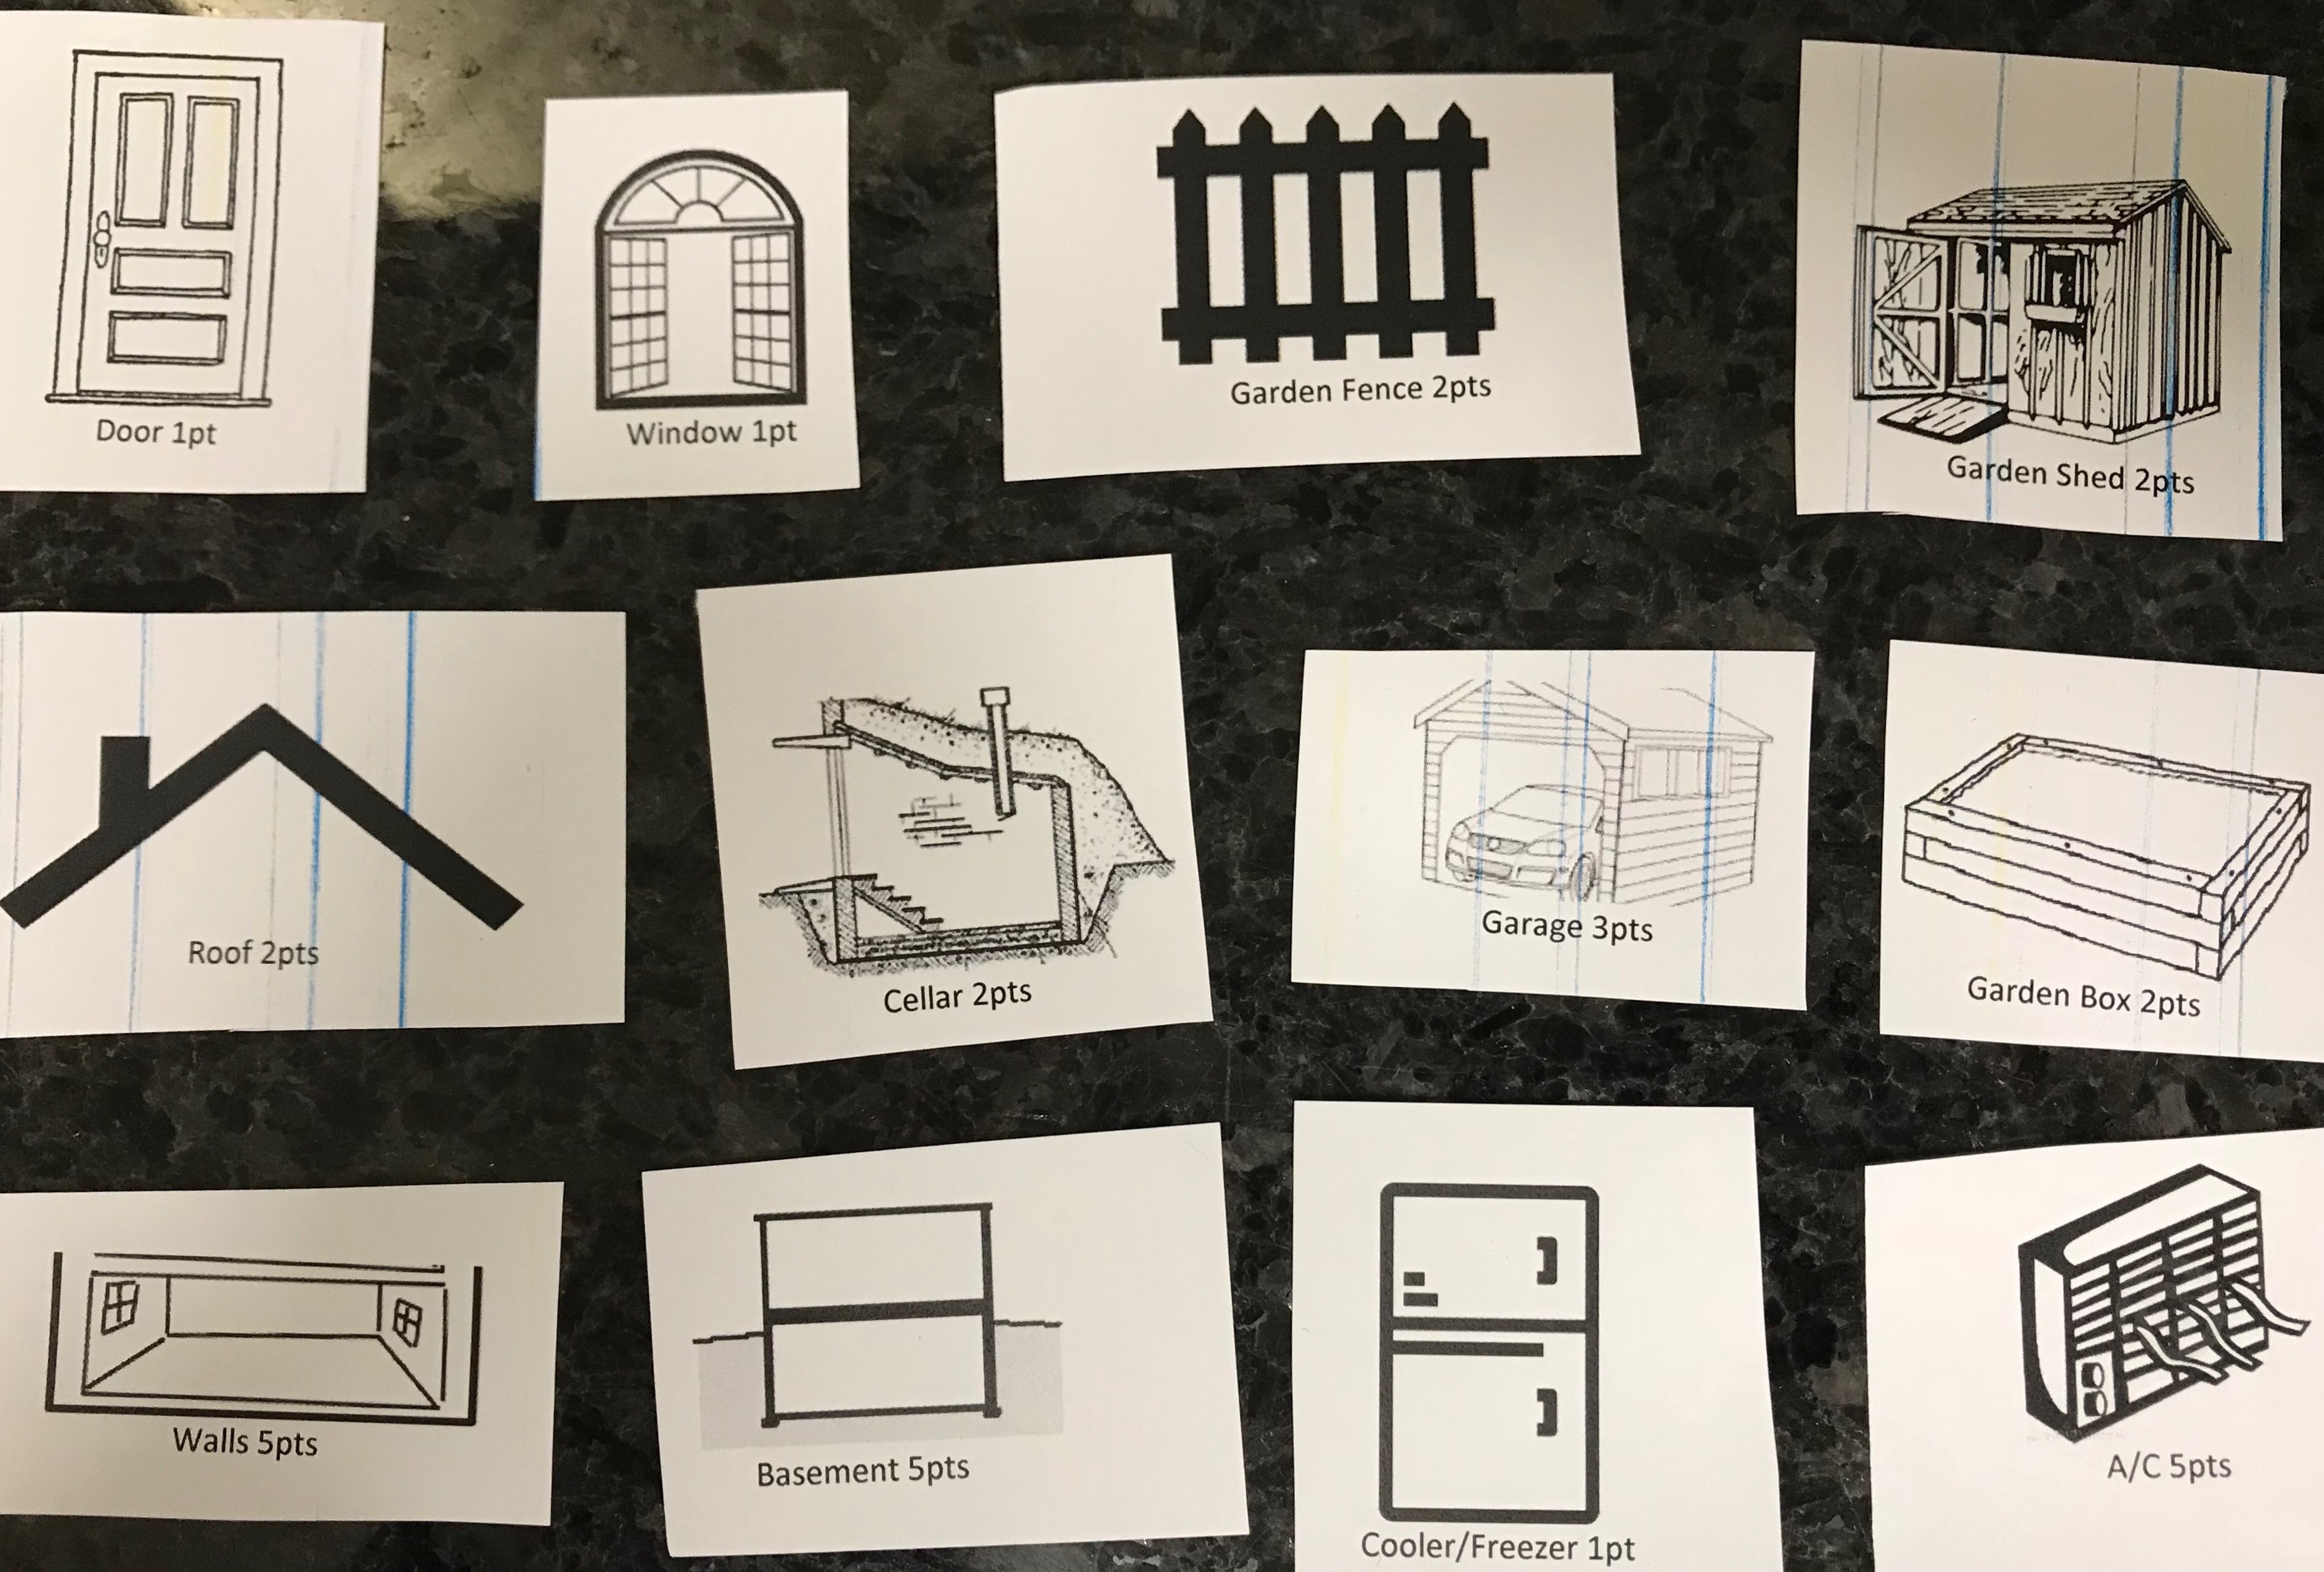 Story cards for various parts of a house